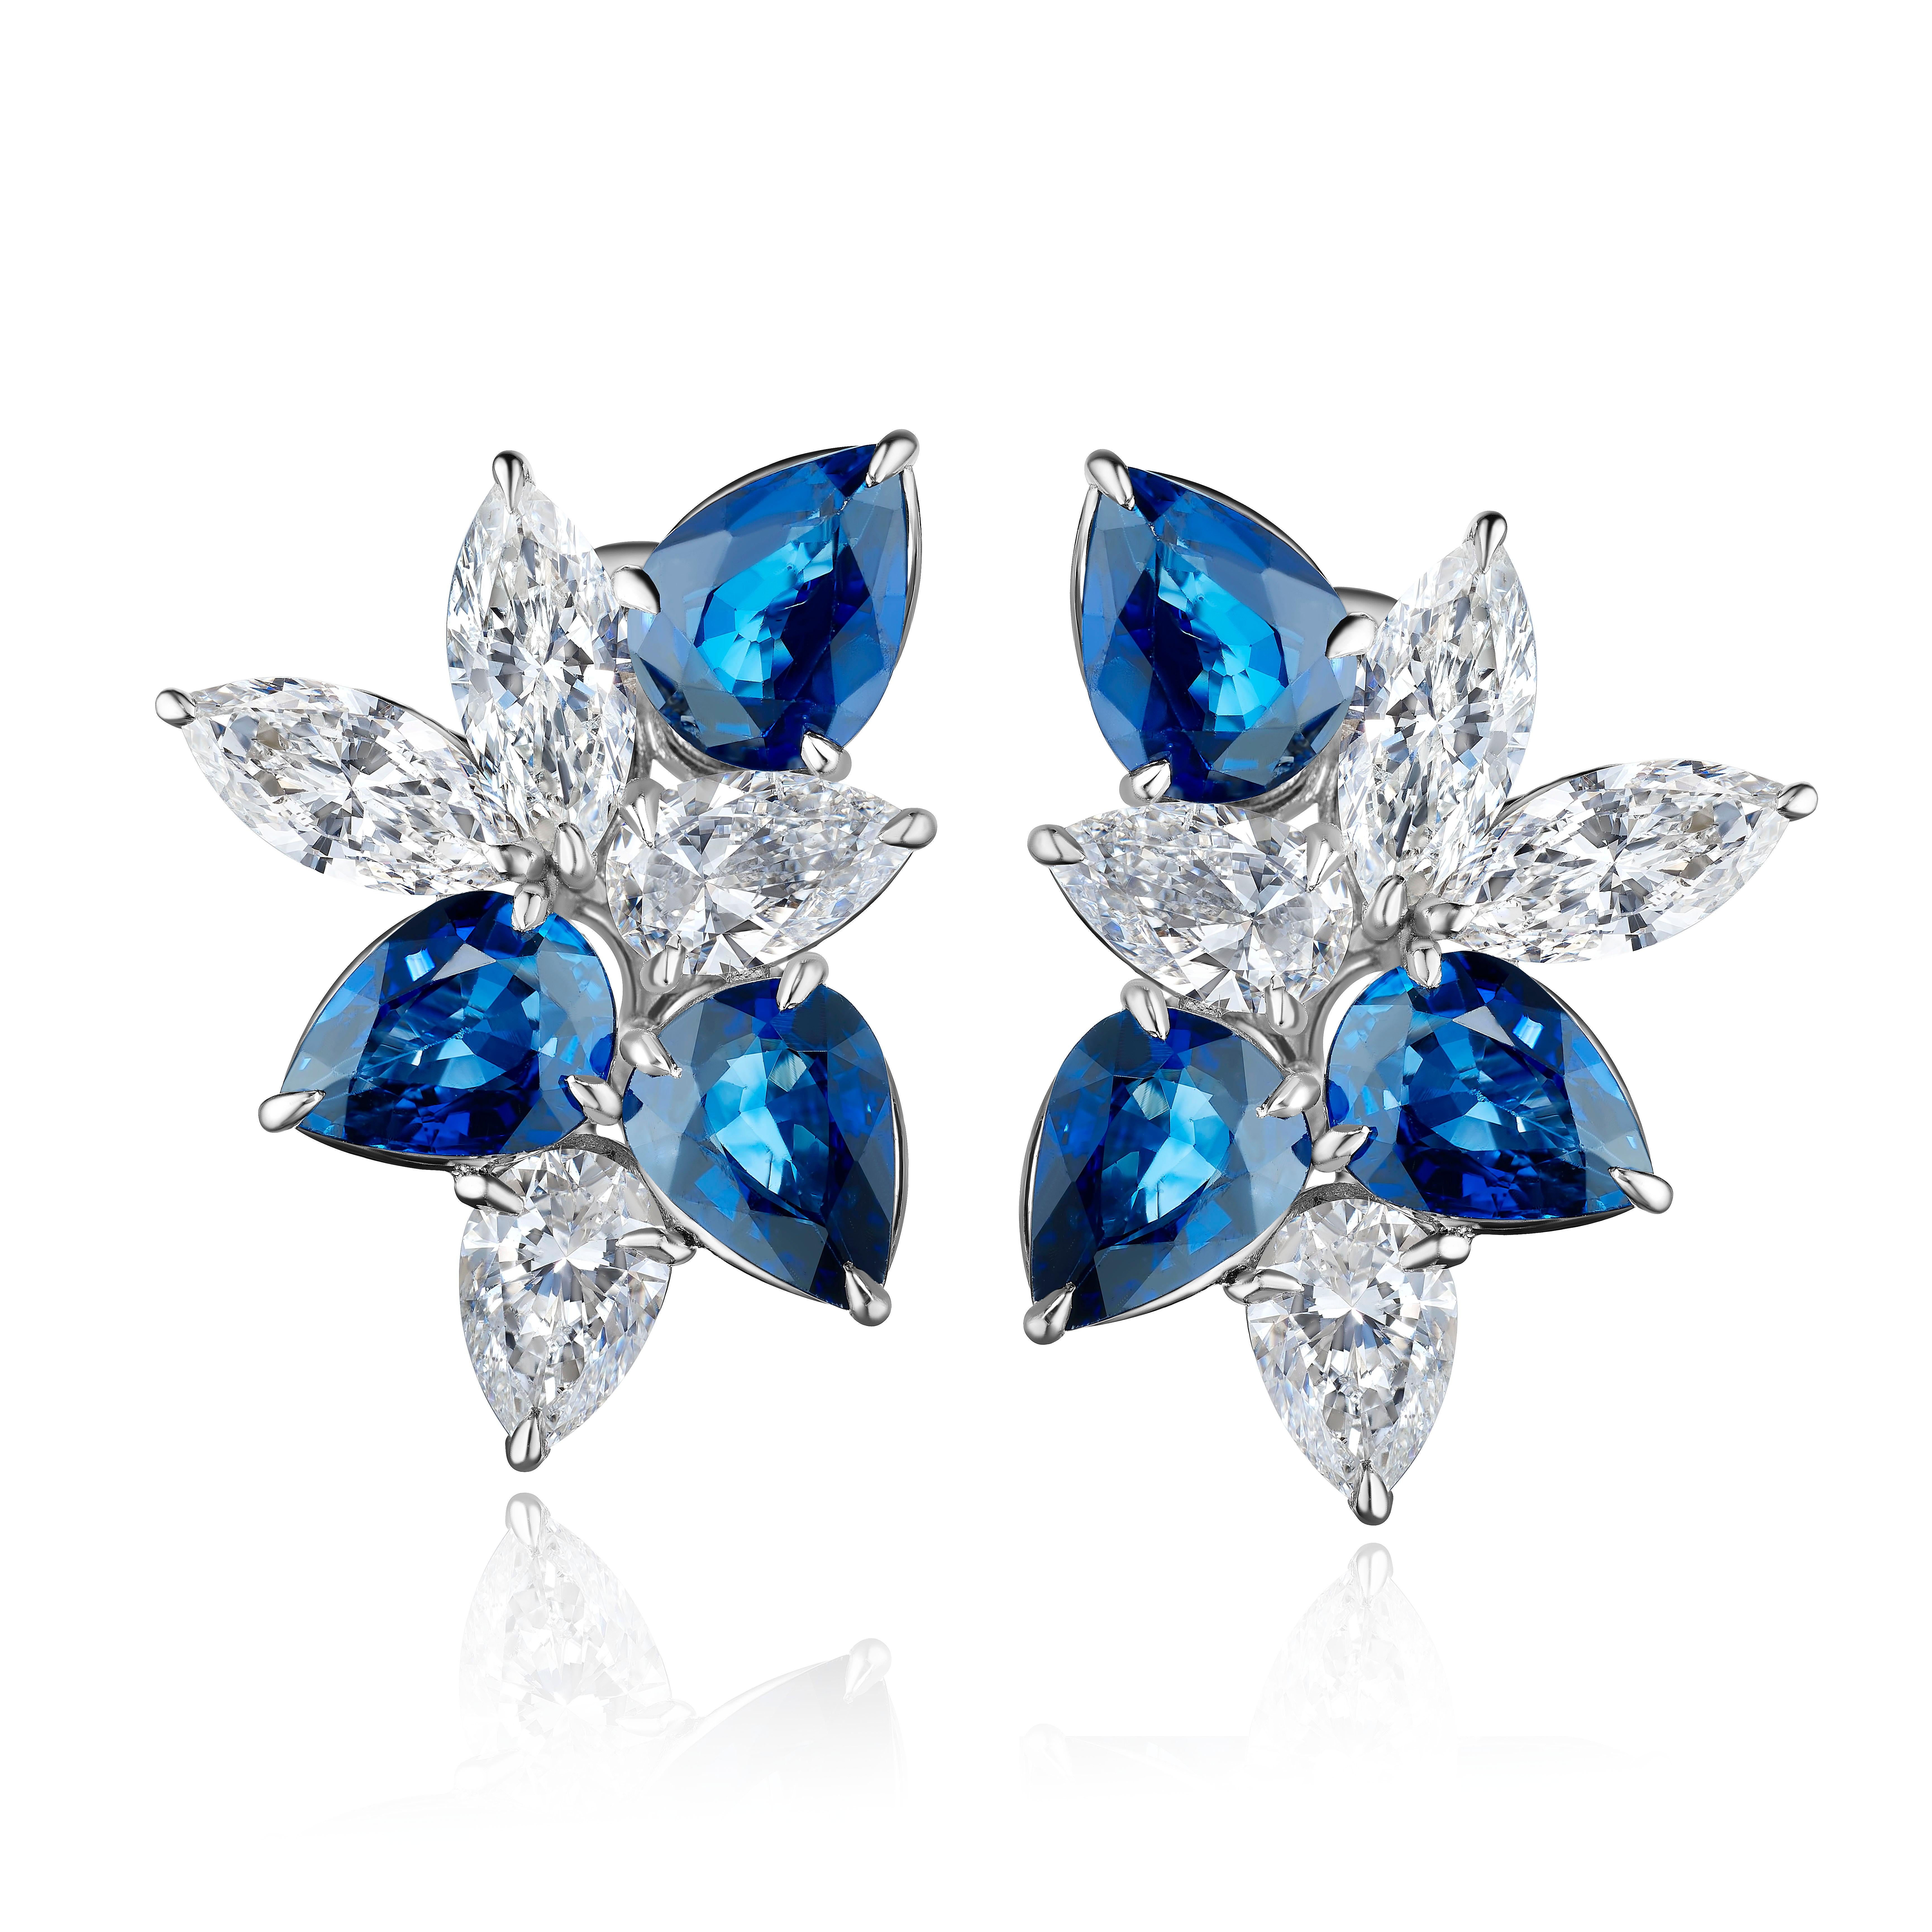 The Classic Cluster Earring. Redefined. Set with Sapphires and Diamonds and Set in Platinum and 18 Karat White Gold.

Sapphires totaling 7.69 Carats.
Diamonds Totaling 4.18 Carats.
11.69 Carats Total